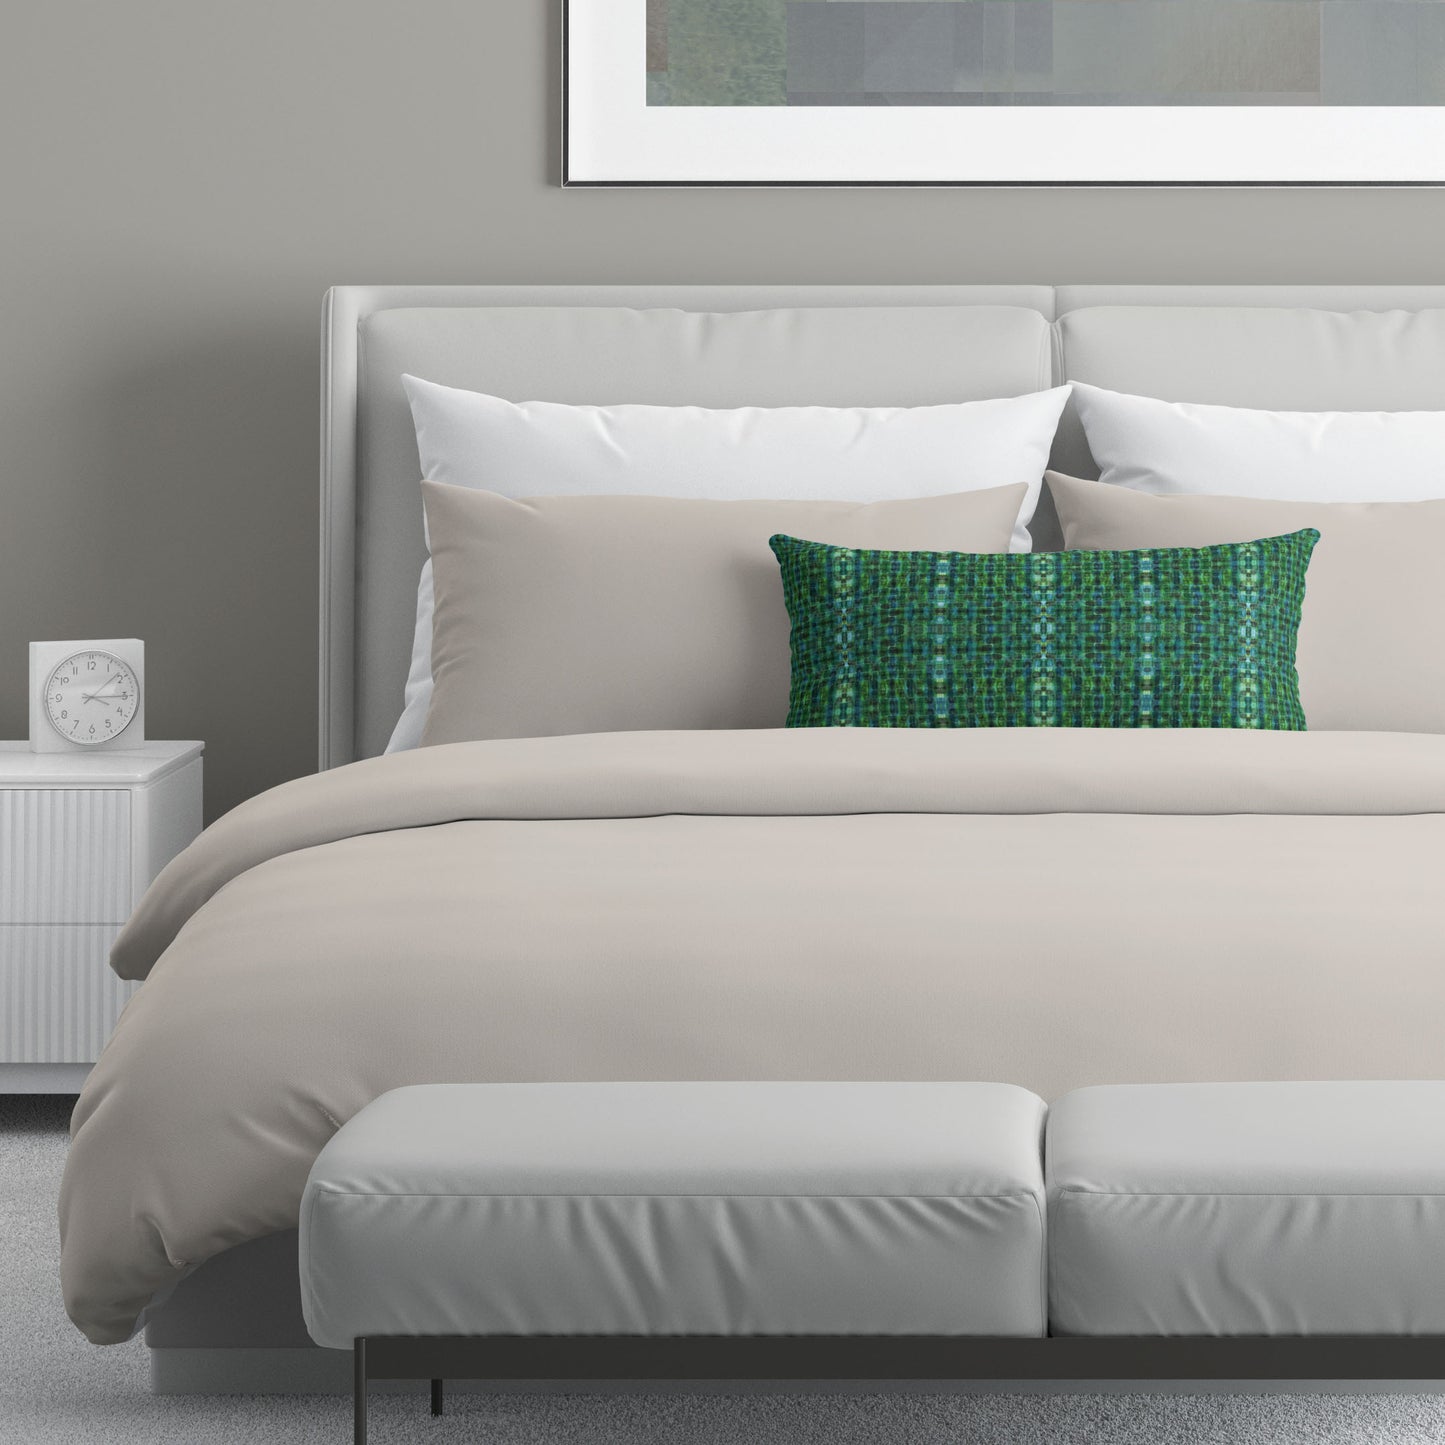 Neutral colored bedroom featuring a bed with a green abstract patterned lumbar pillow.